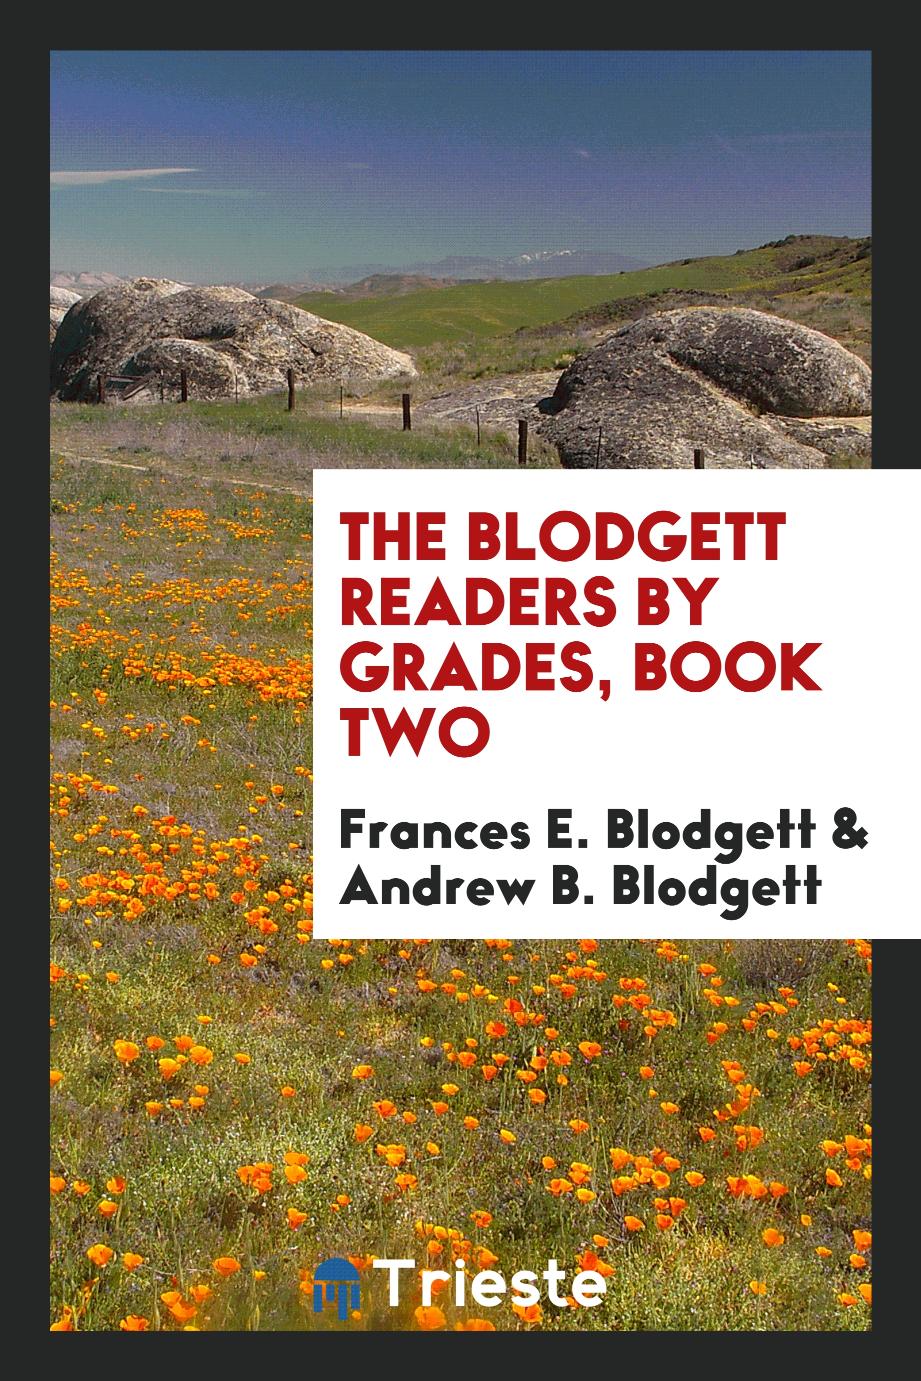 The Blodgett Readers by Grades, Book Two